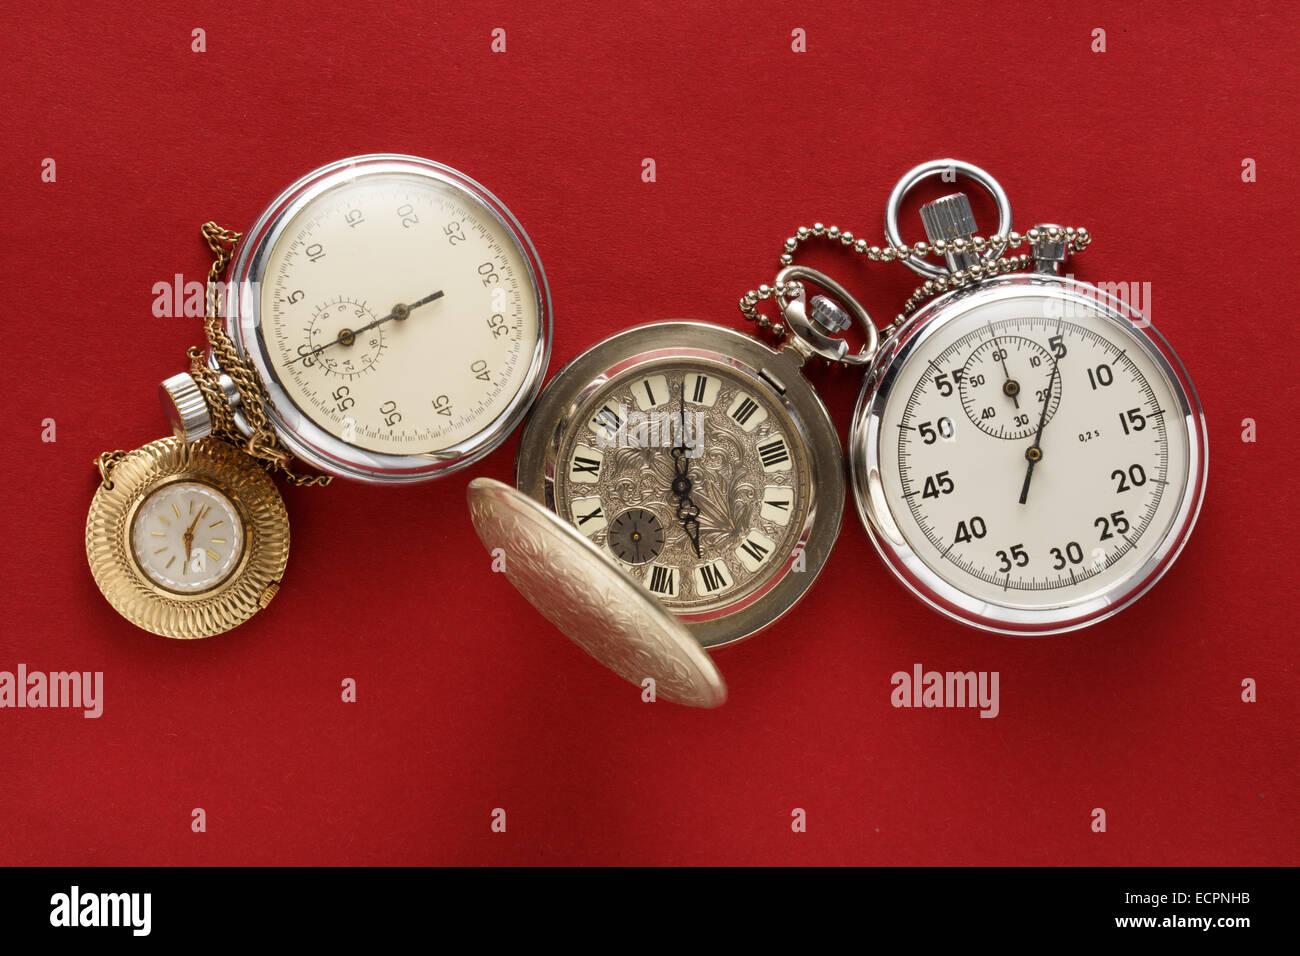 Pocket vintage watch and stopwatch on red Stock Photo